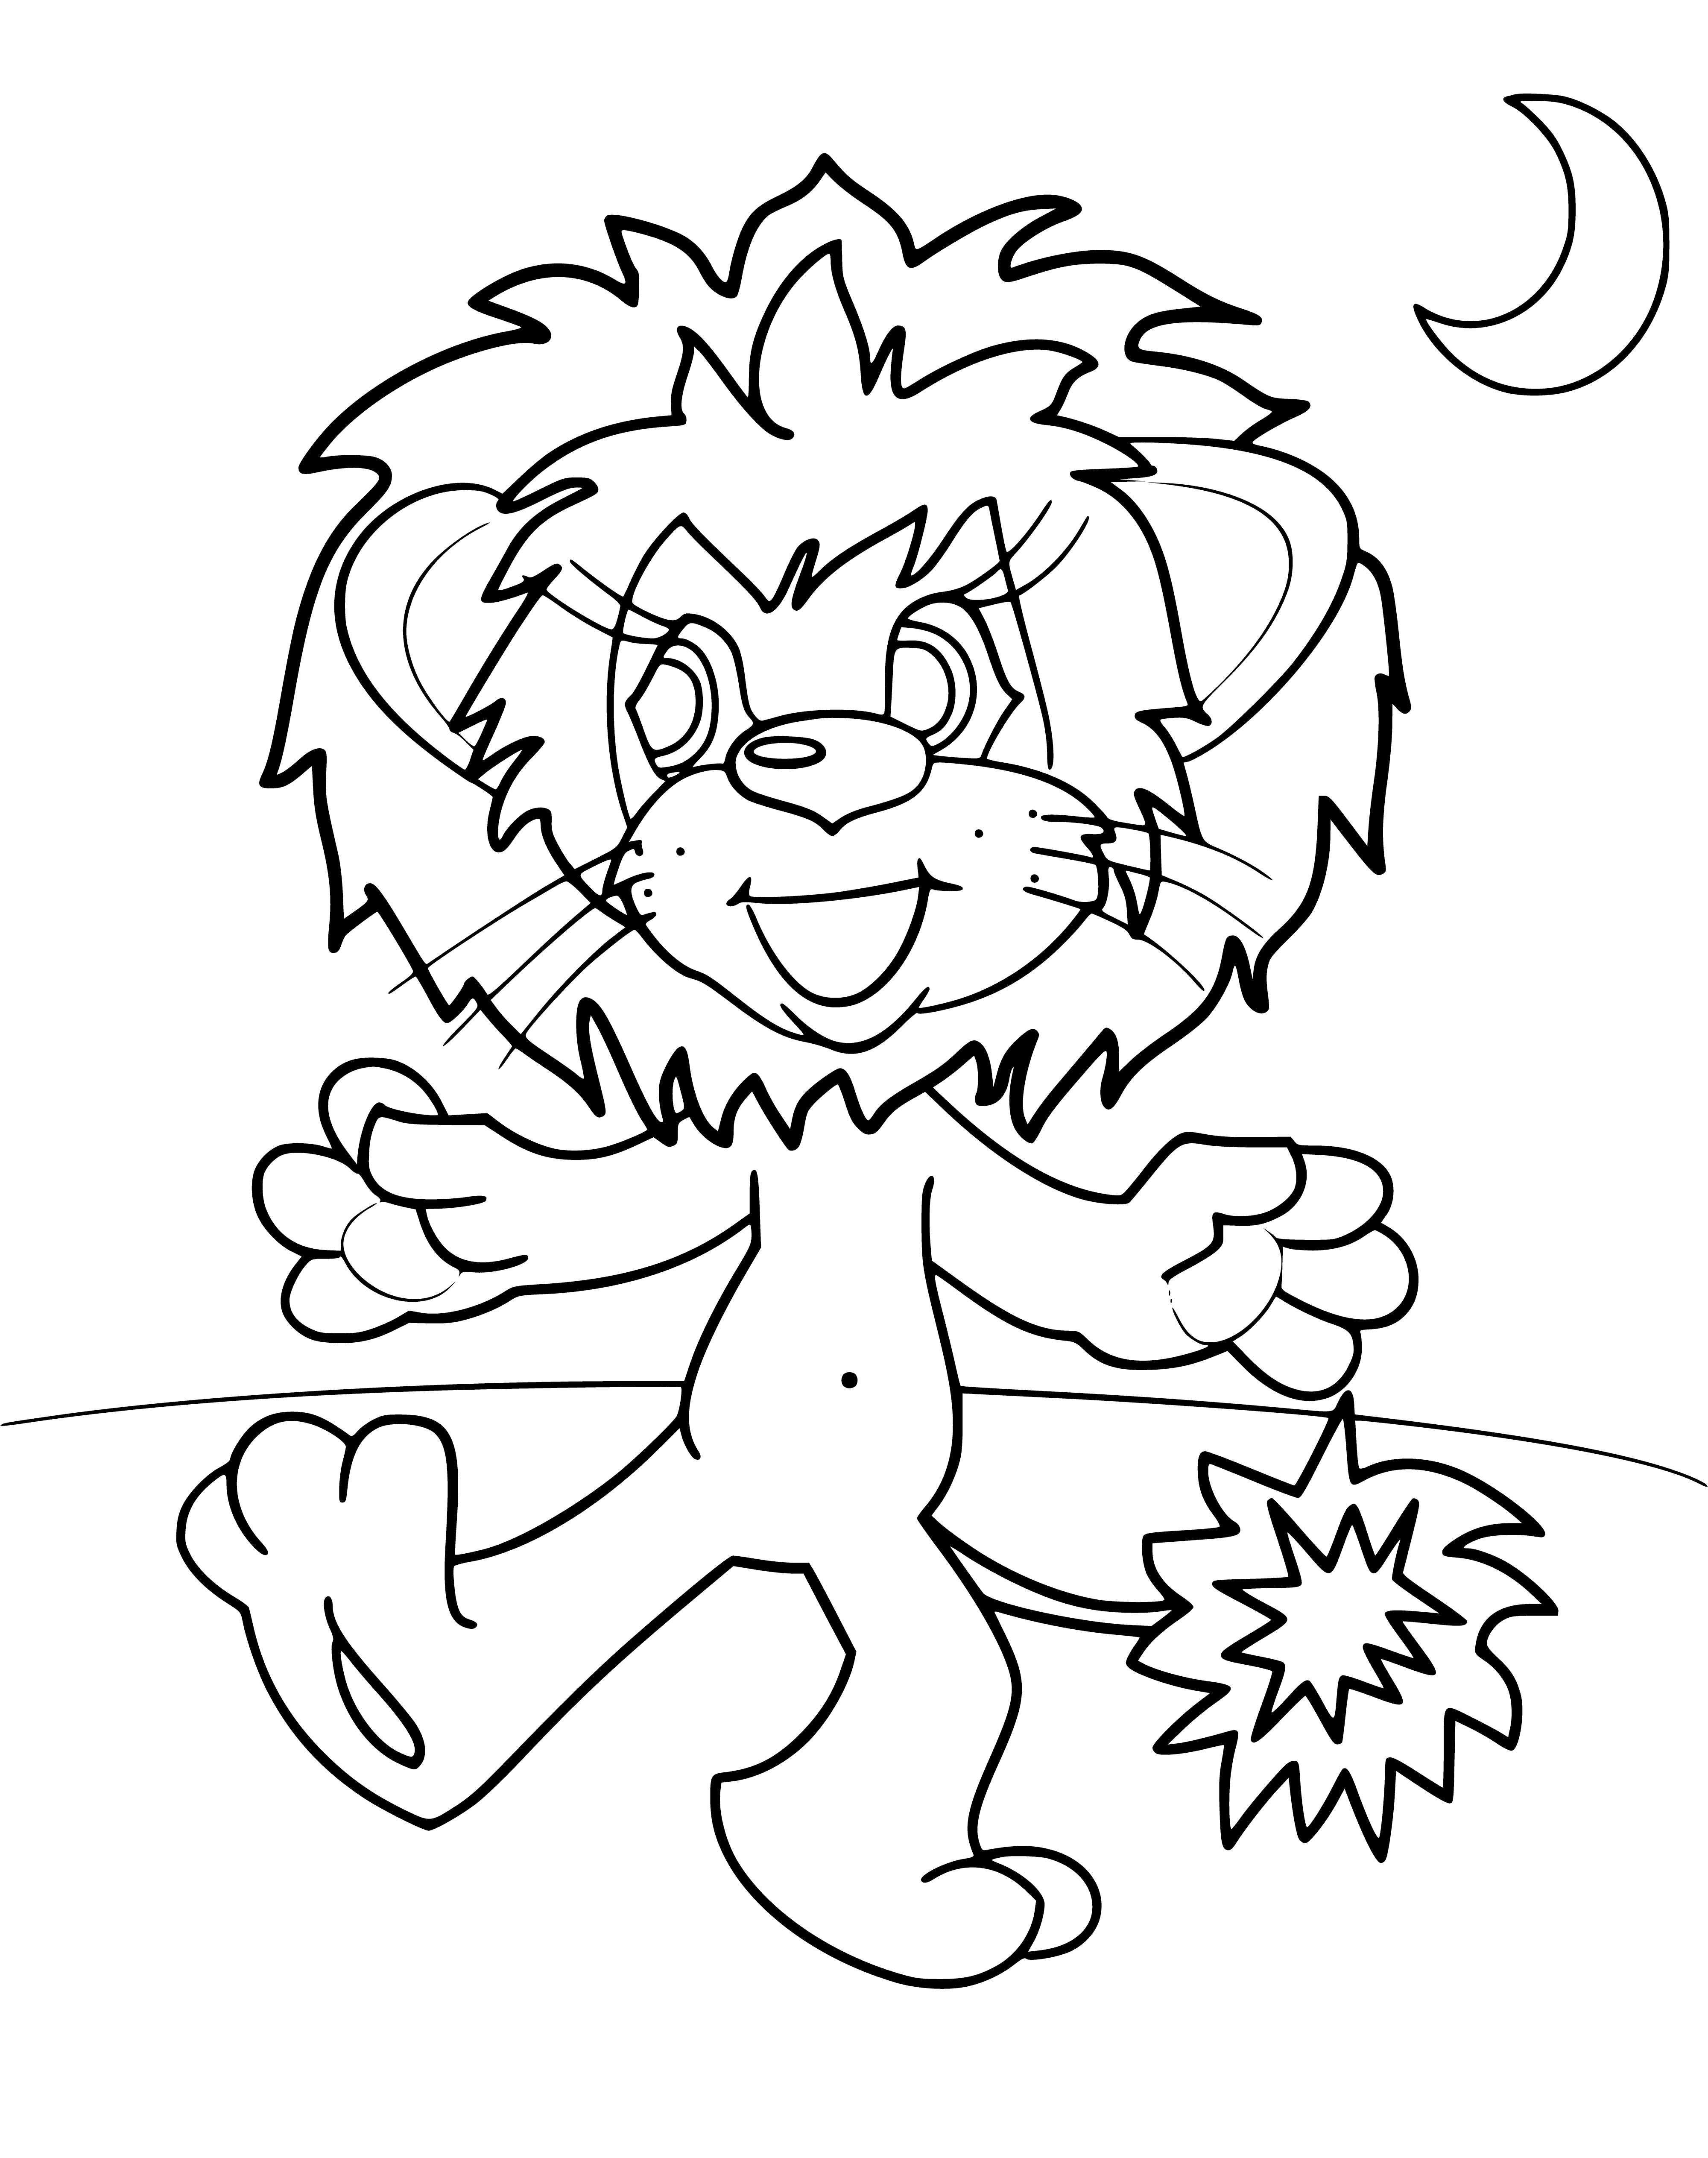 coloring page: A lion cub and turtle sing a song together, sitting on a rock in a coloring page.